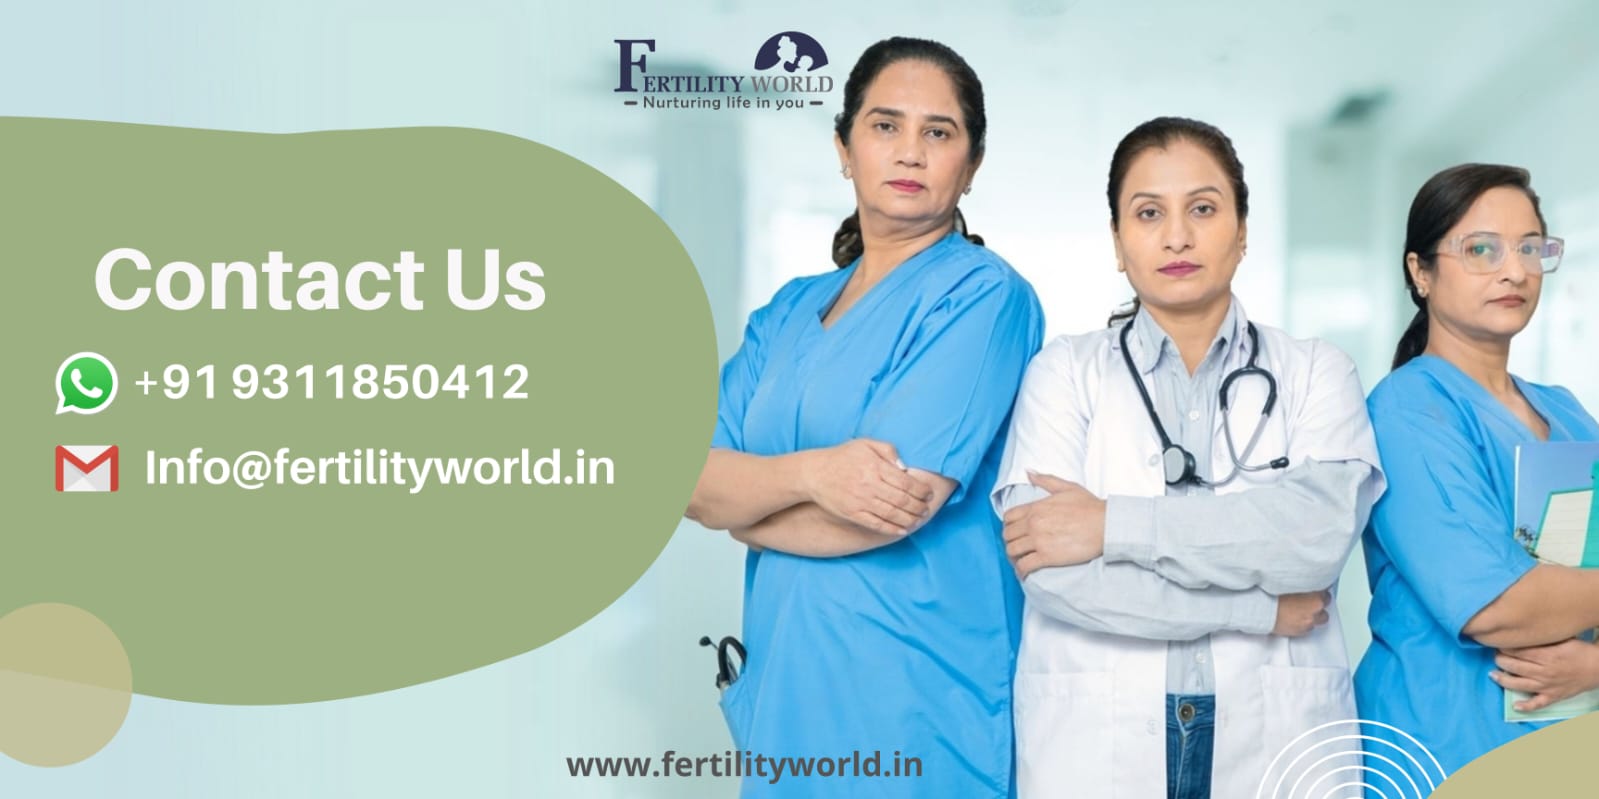 LAPAROSCOPIC SURGERY FOR UTERUS REMOVAL COST, contacts